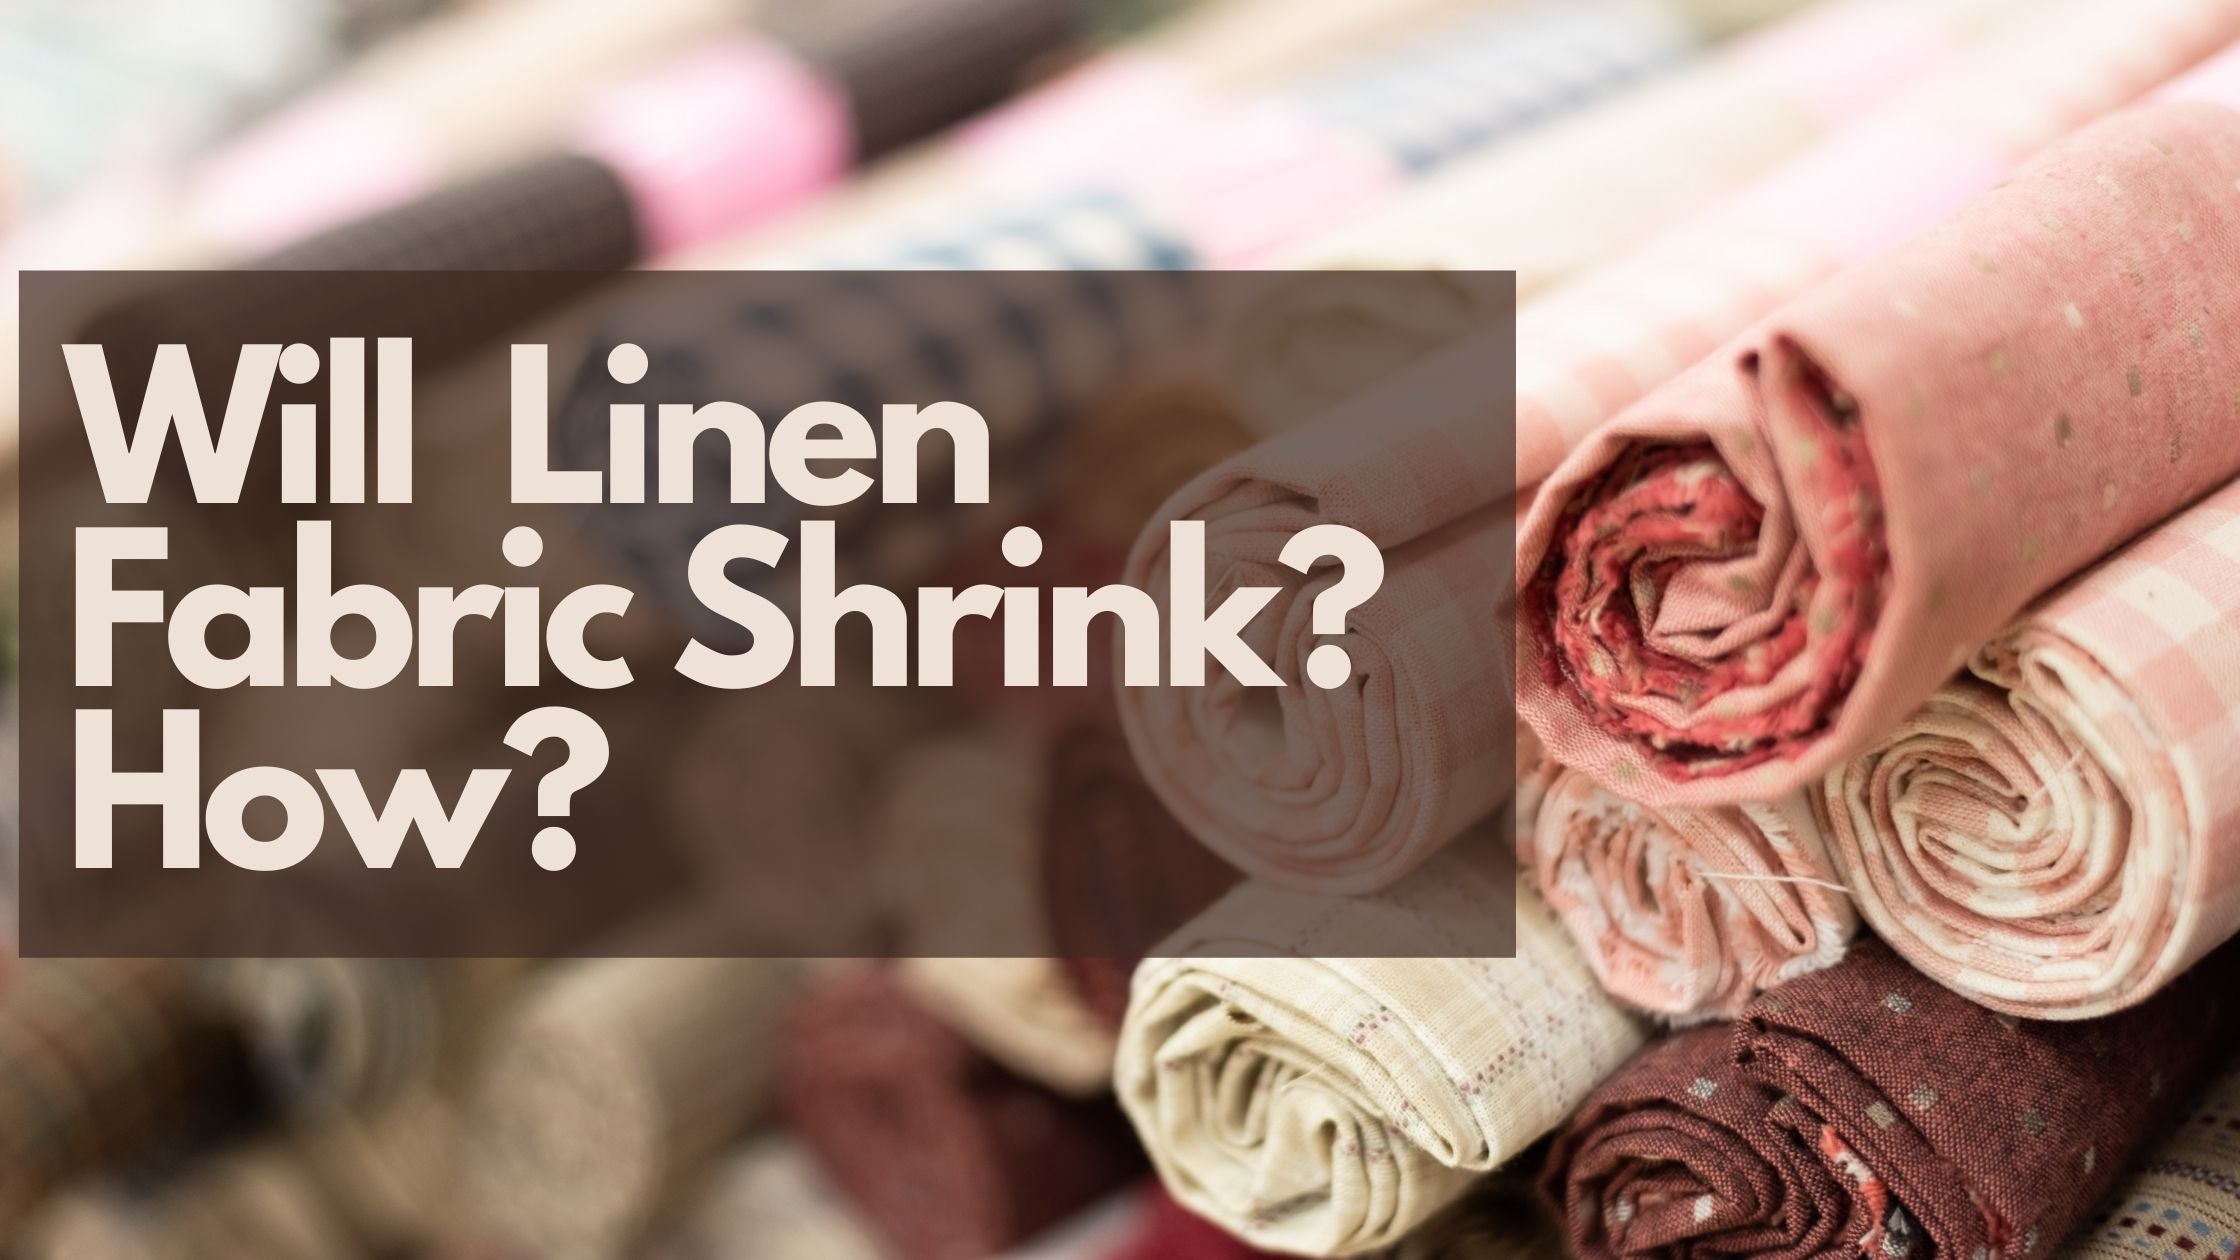 Will Linen Fabric Shrink? How?